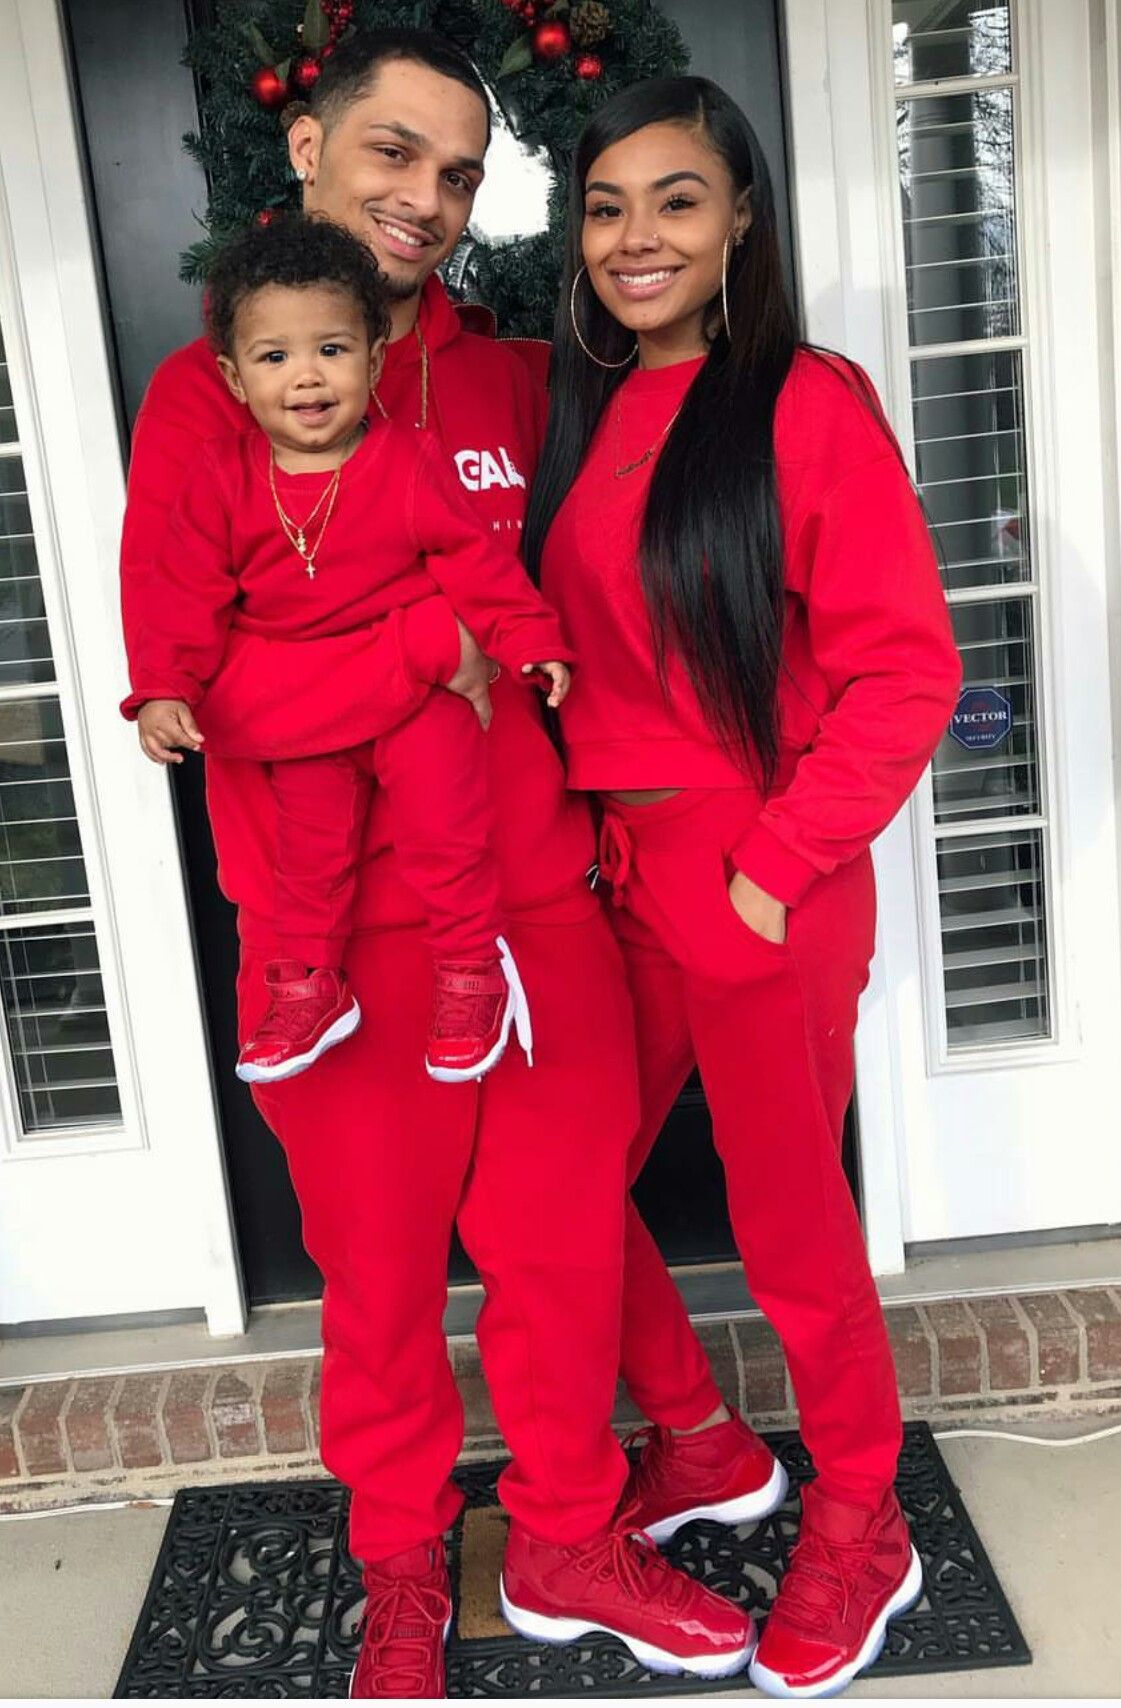 Matching-Outfits.. 70+ Best Family Photoshoot Outfit Ideas That You Must Check